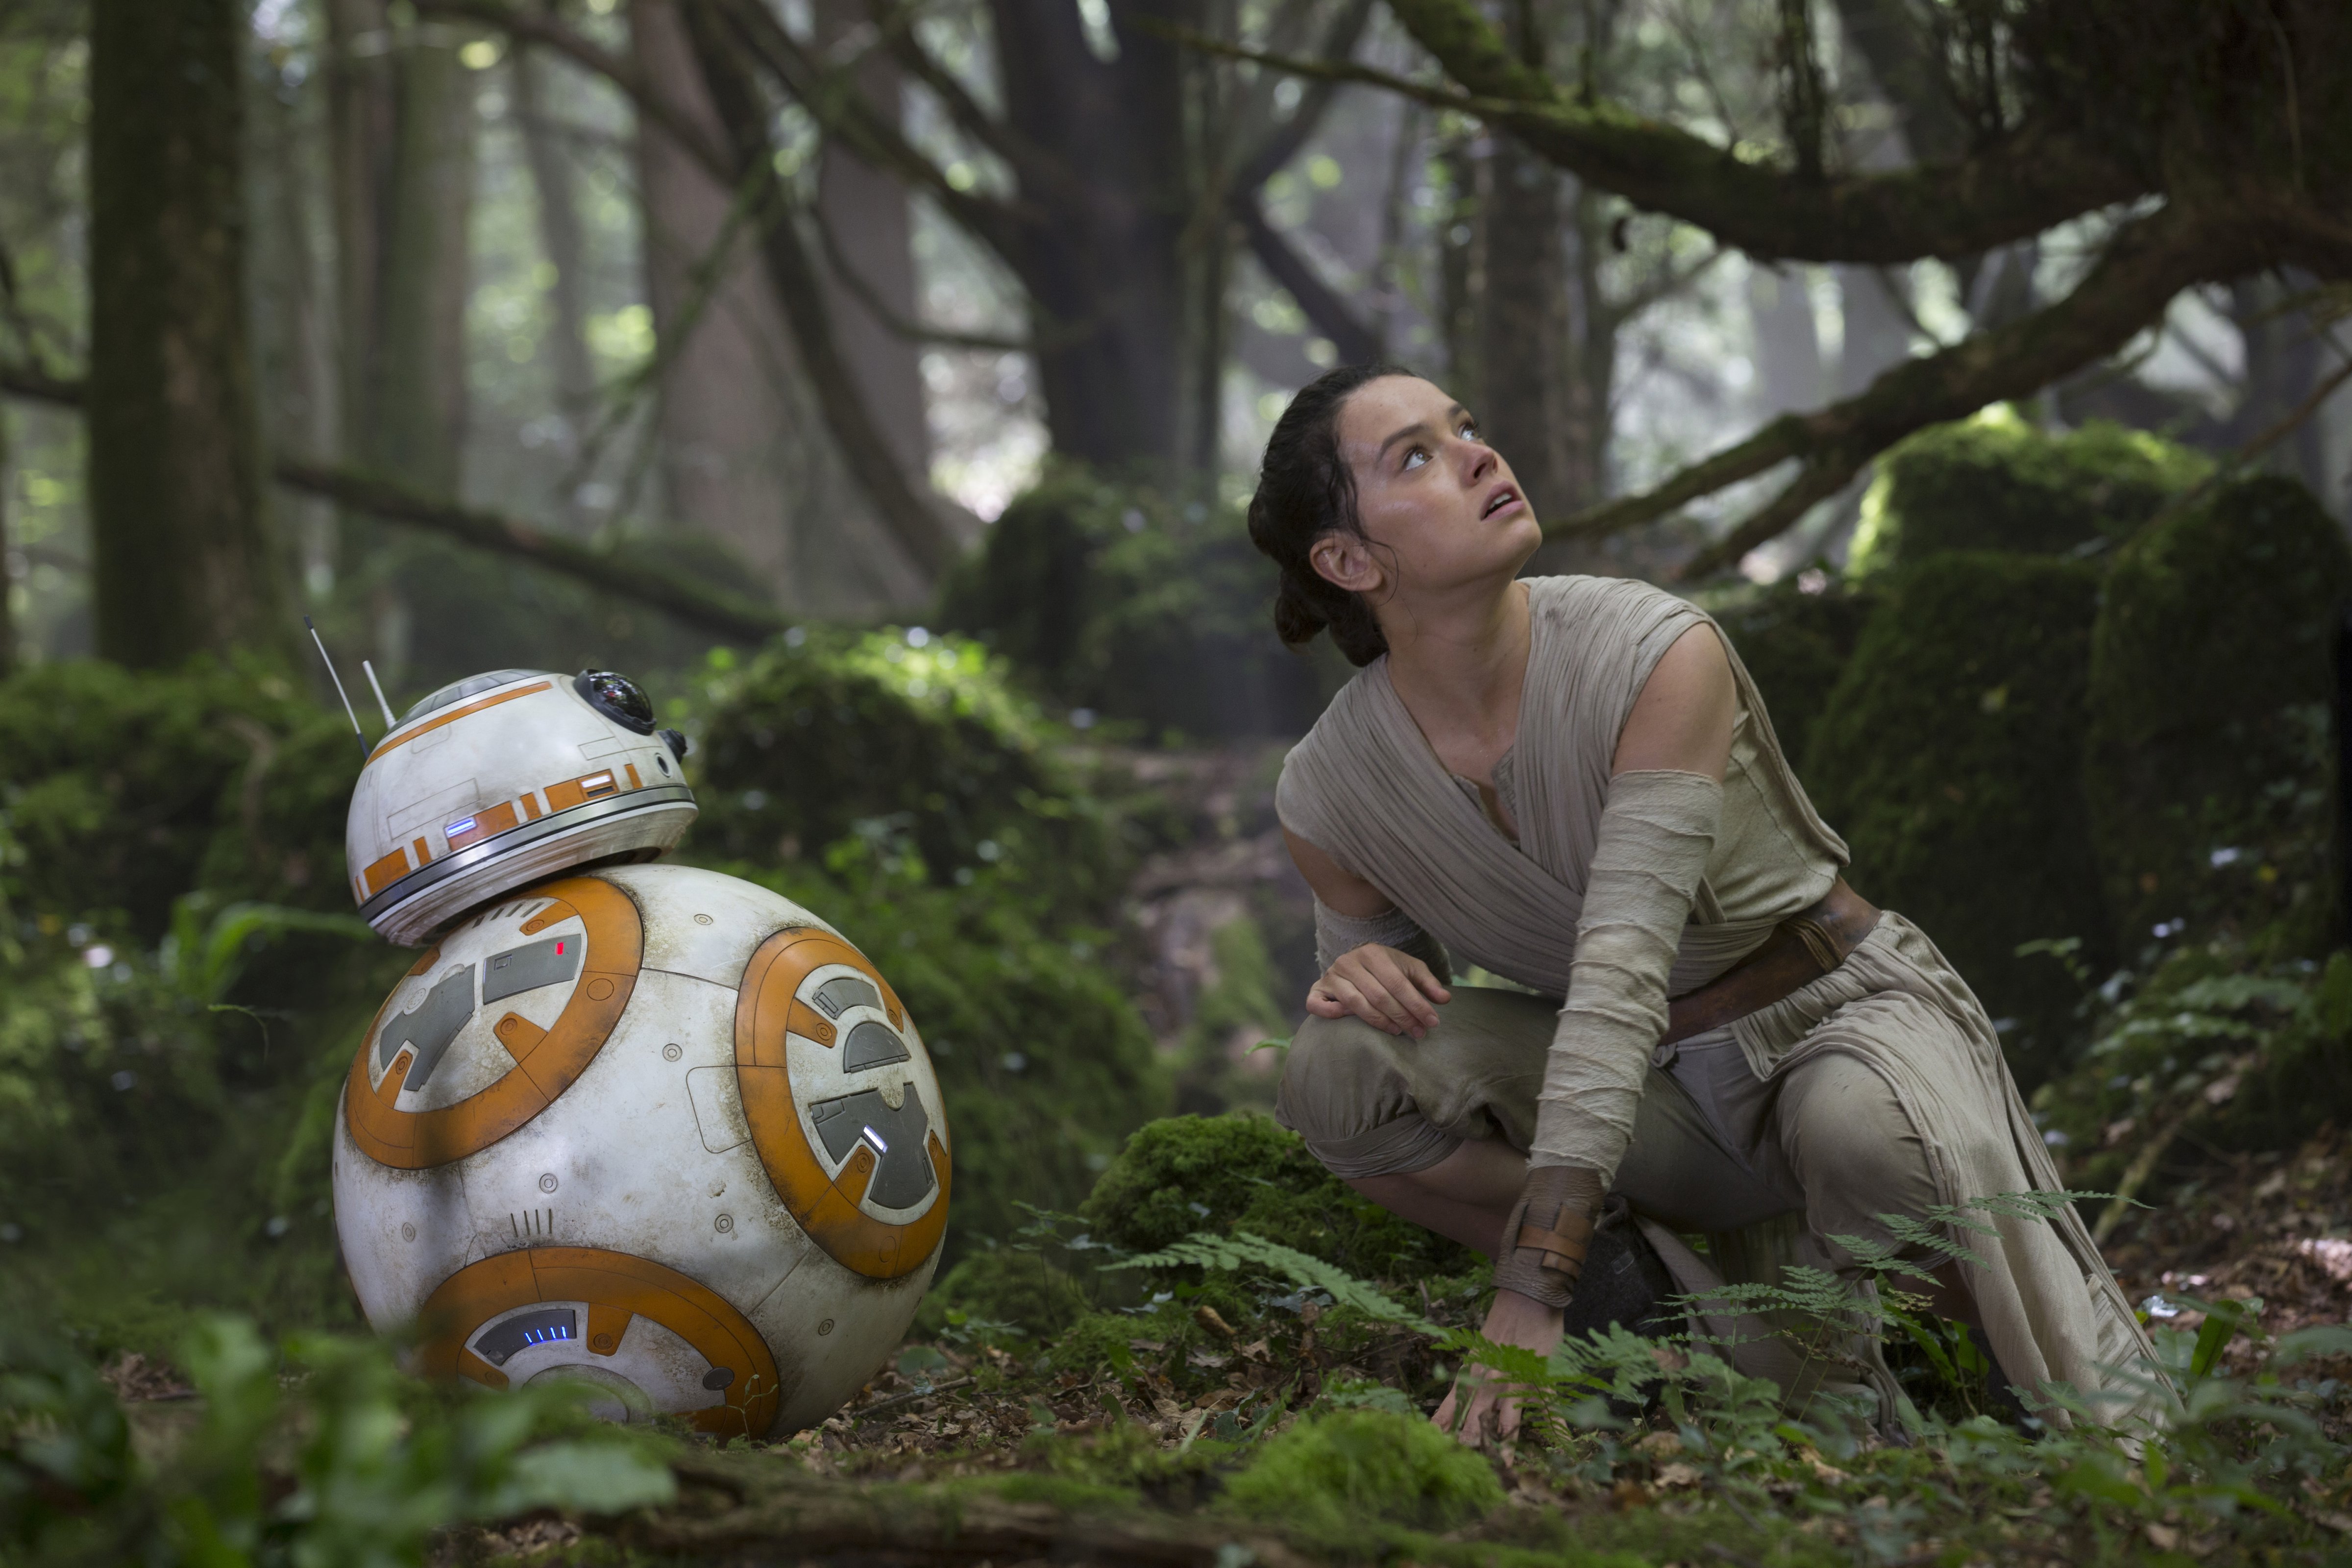 BB-8 and Rey, Daisy Ridley, in 